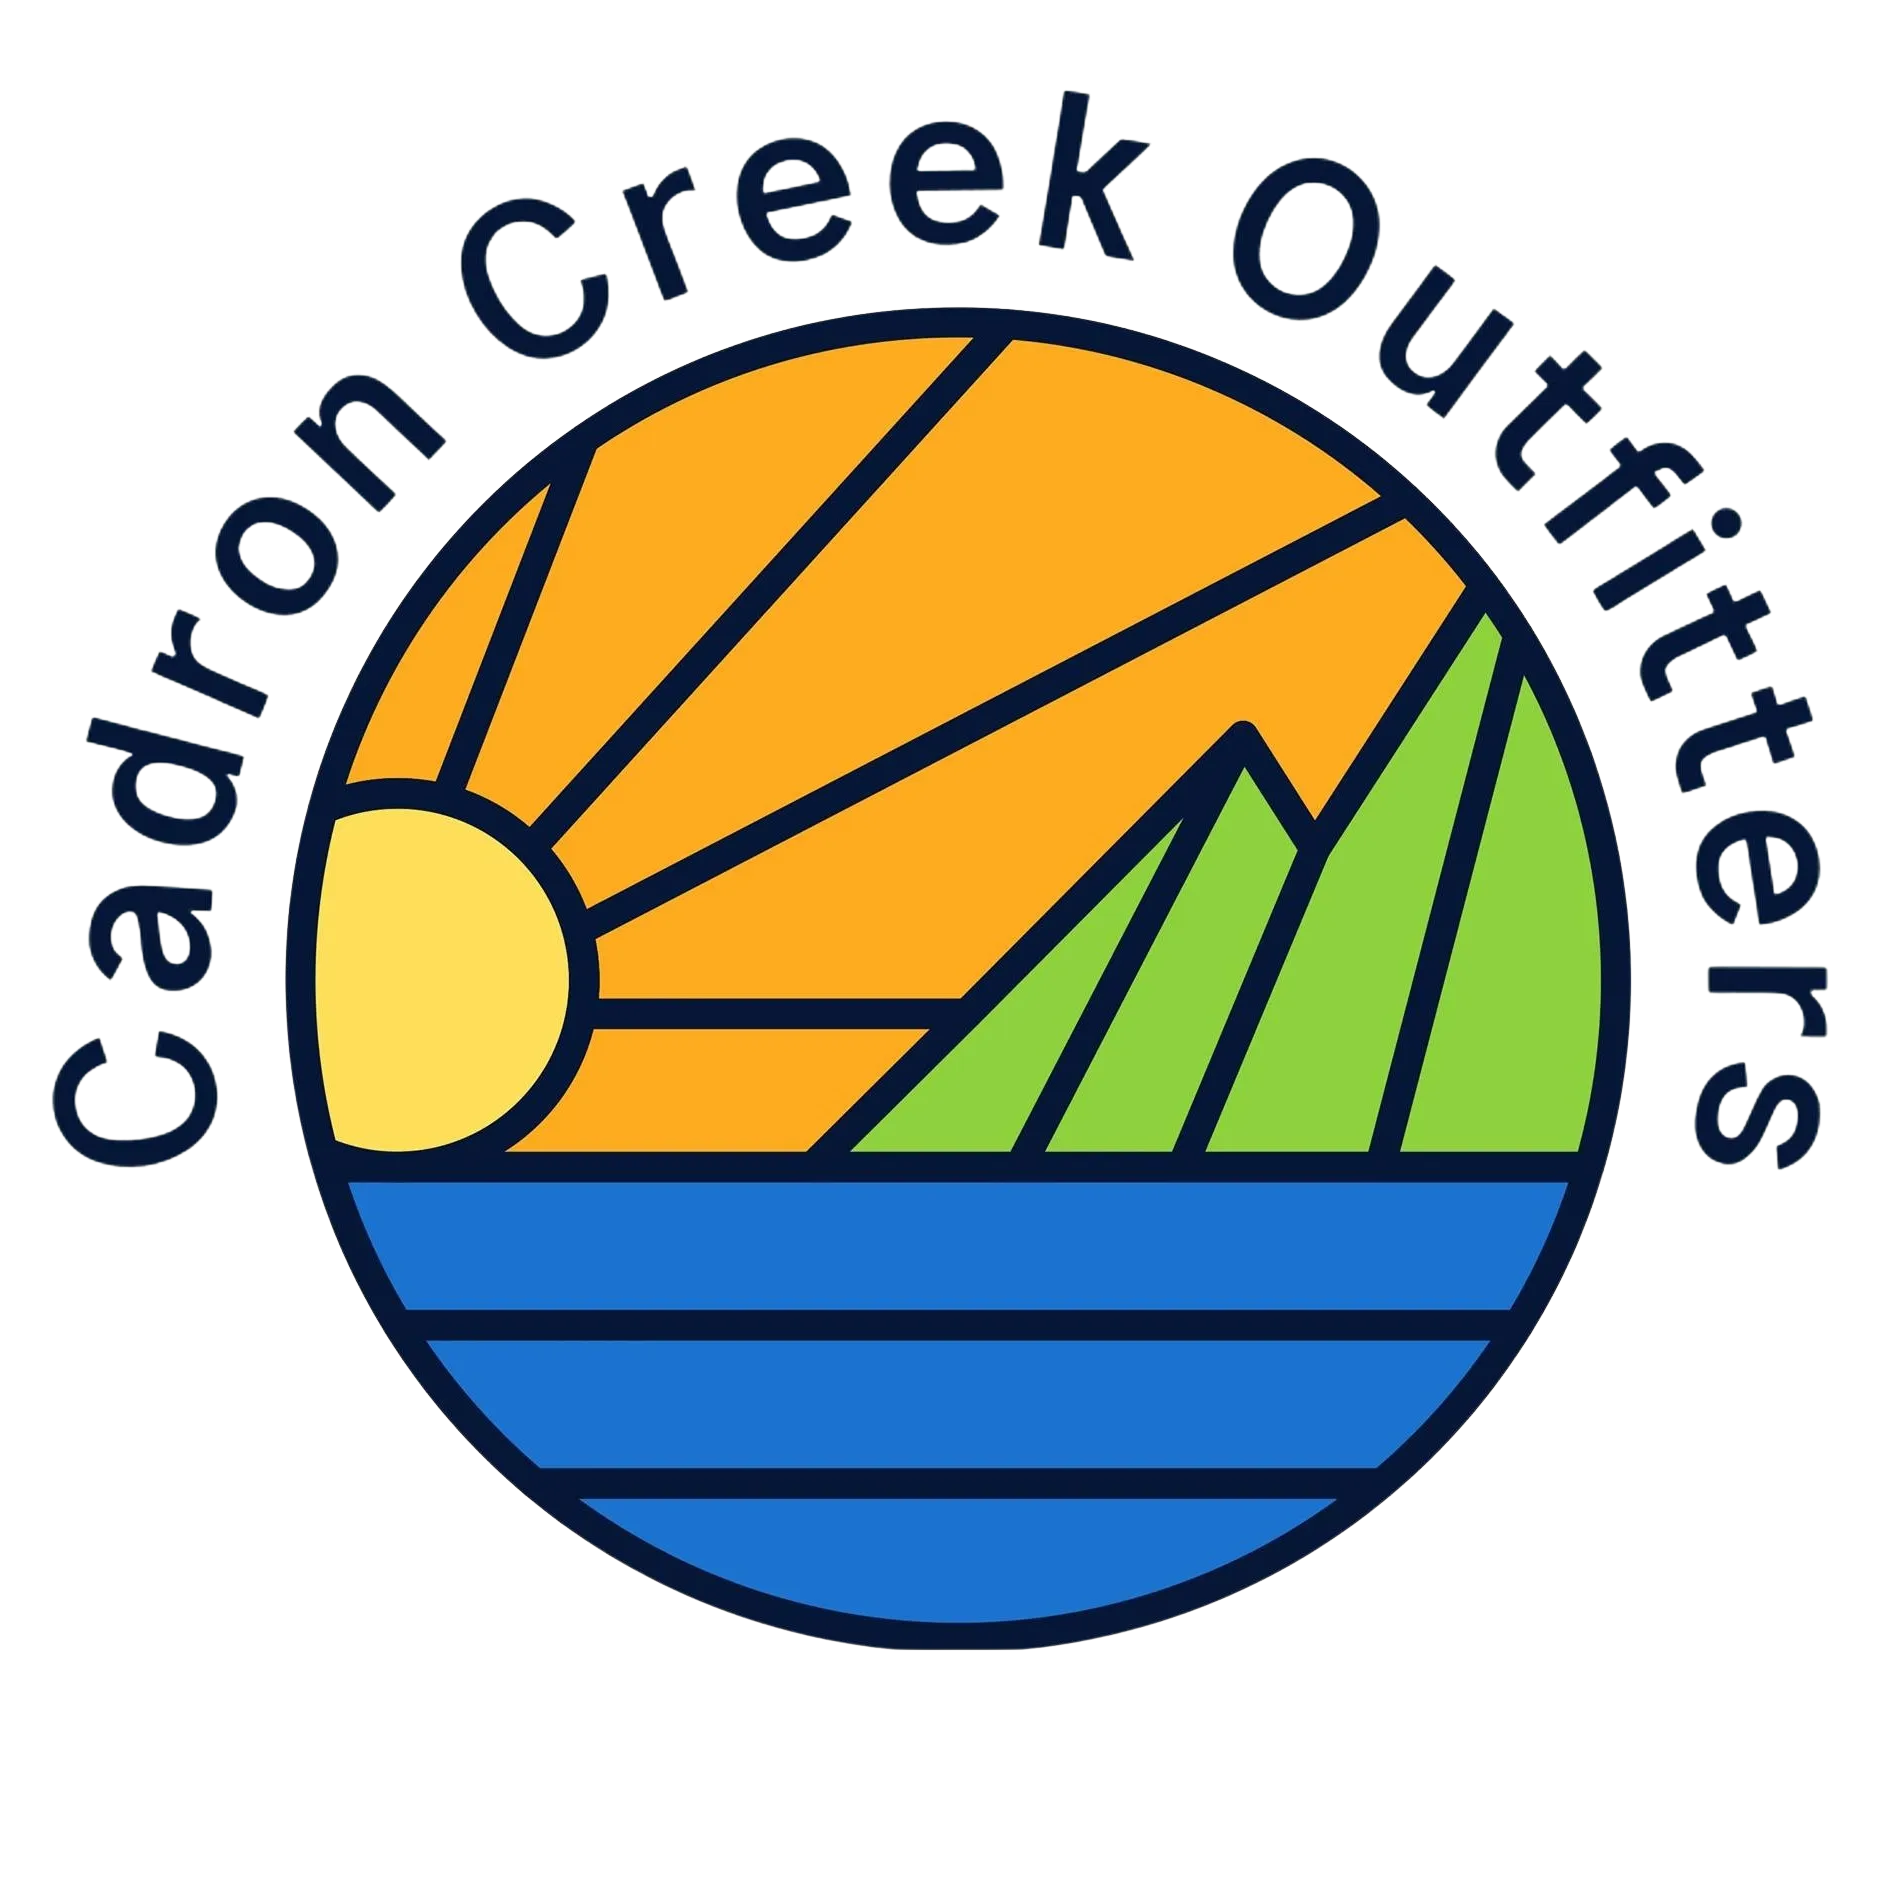 Cadron Creek Outfitters